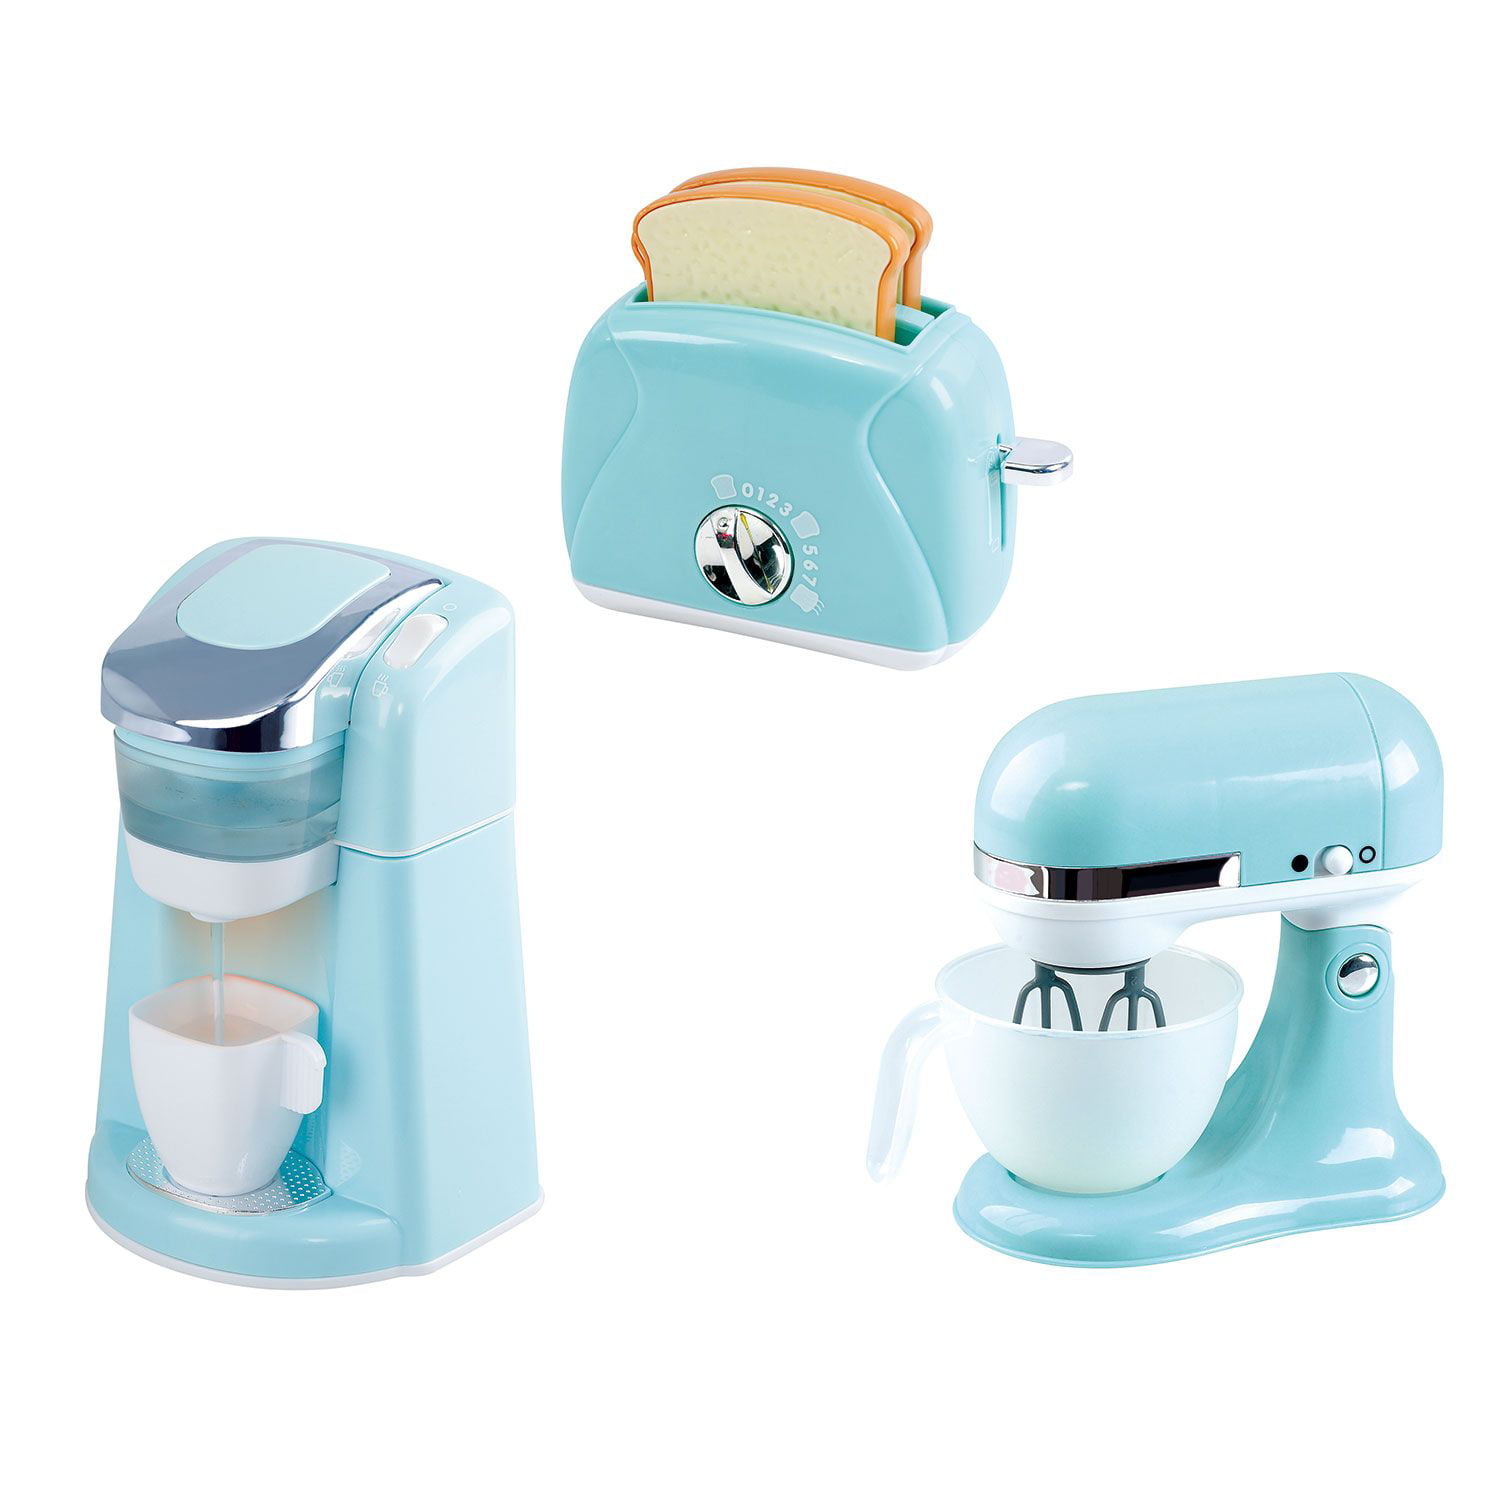 Playgo Toys Kitchen Pretend Blender Toaster Iron Mixer Battery Operated  Works